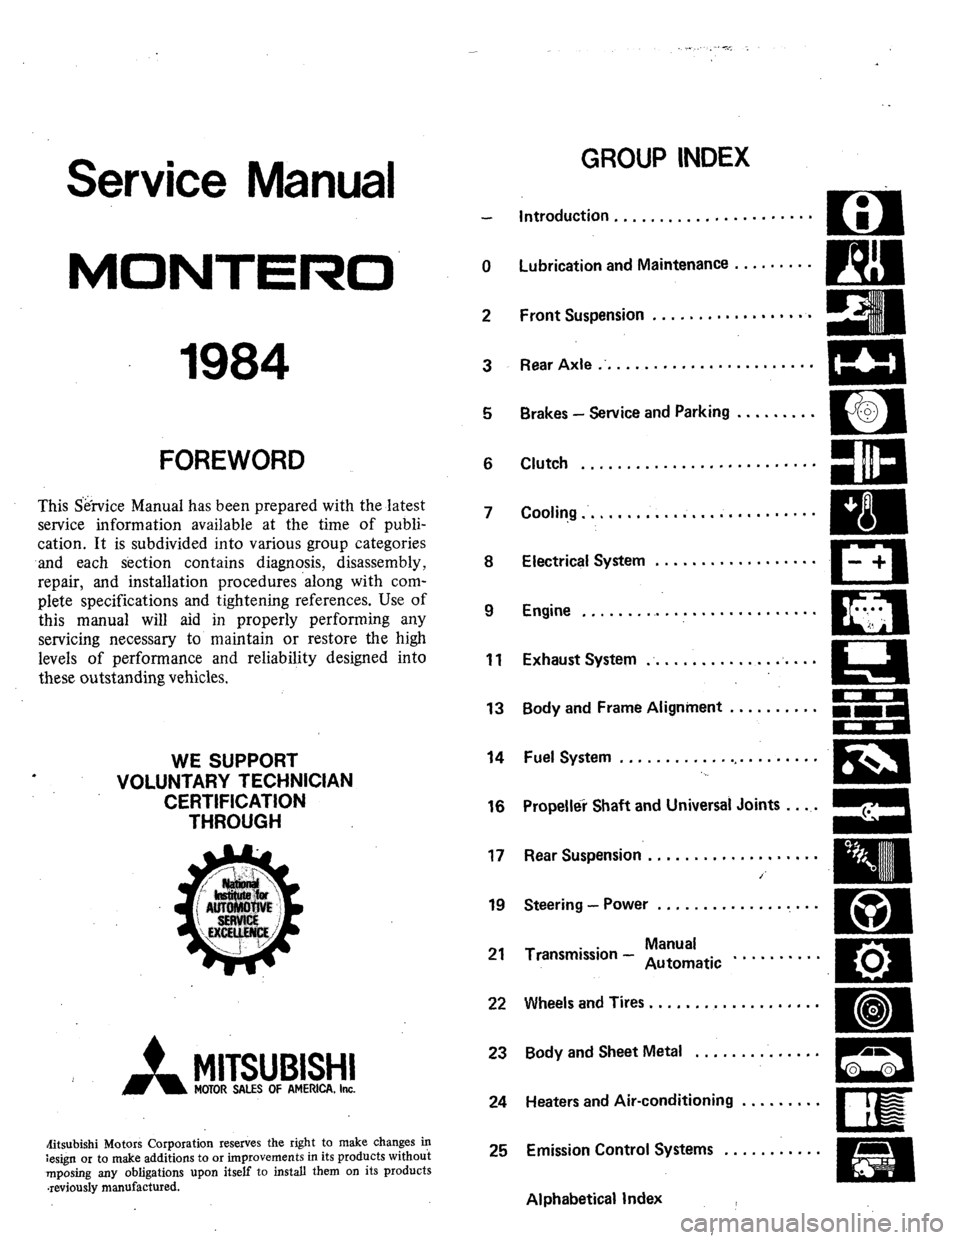 MITSUBISHI MONTERO 1984 1.G Workshop Manual . . c-, : 
Service Manual 
MONTERO 
1984 
FOREWORD 
This Sk-vice Manual has been prepared with the latest 
service information available at the time of publi- 
cation. It is subdivided into various gr